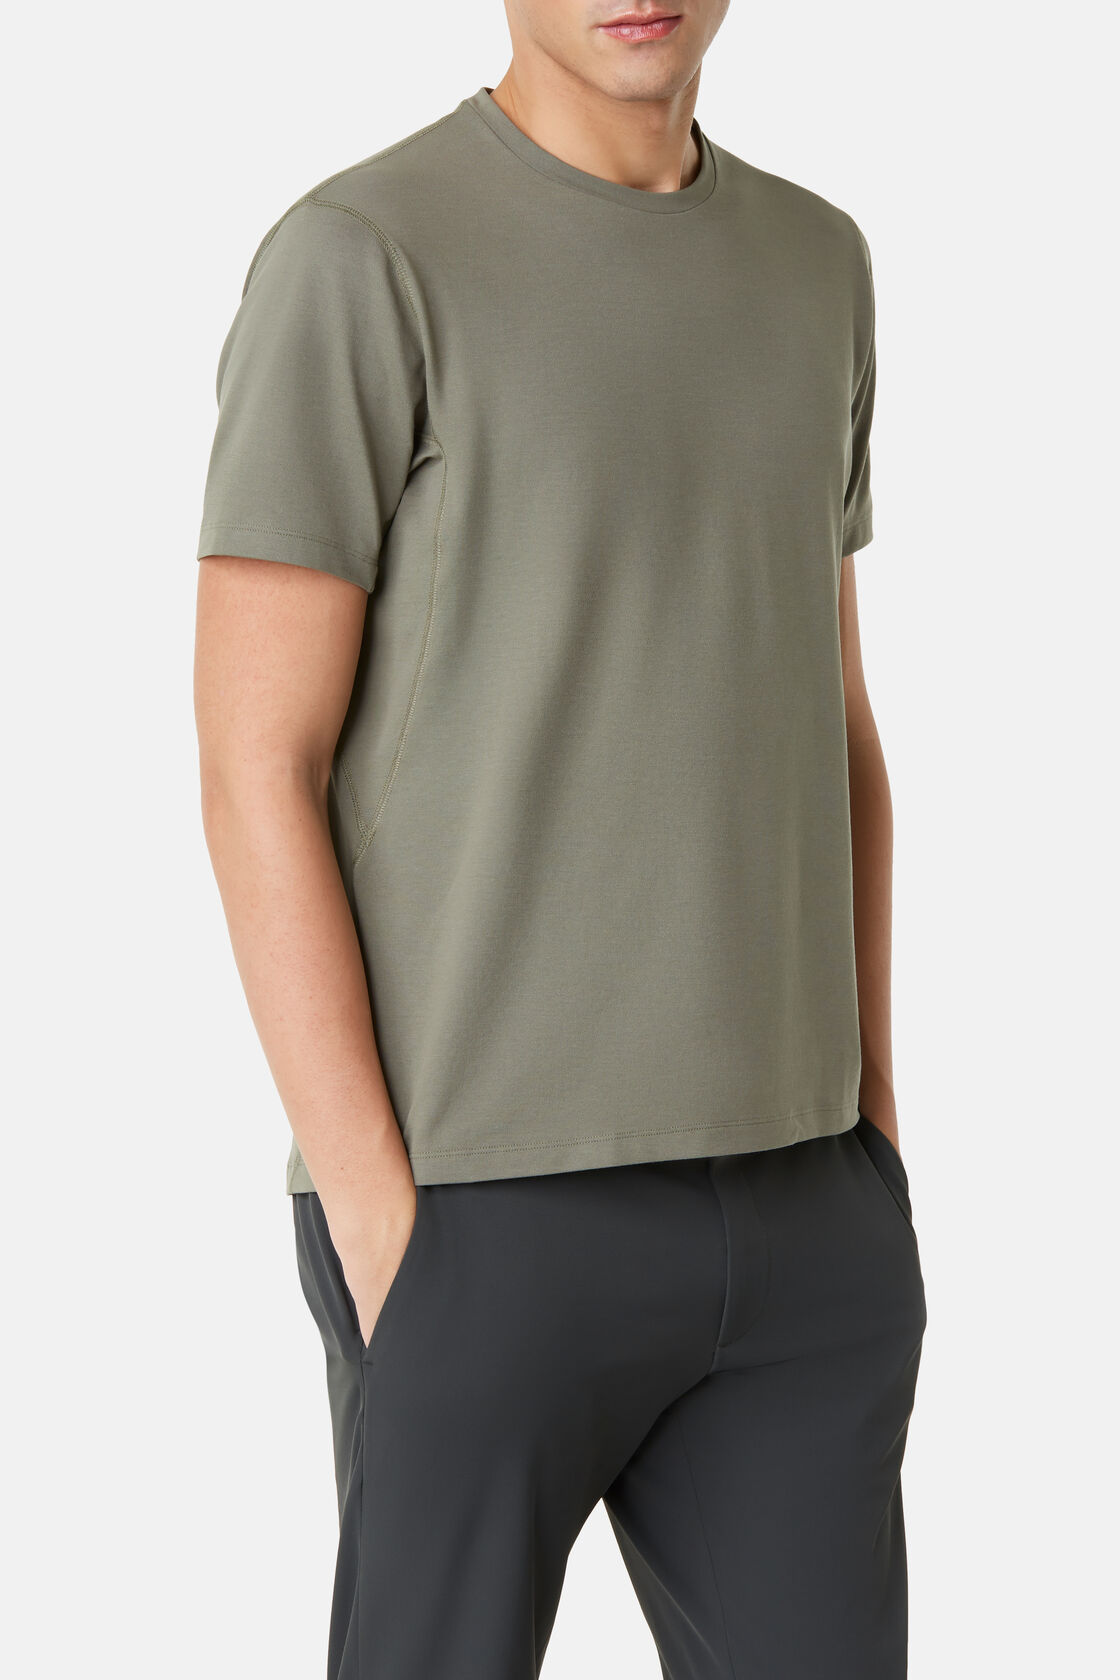 T-Shirt in Sustainable Performance Pique, Military Green, hi-res